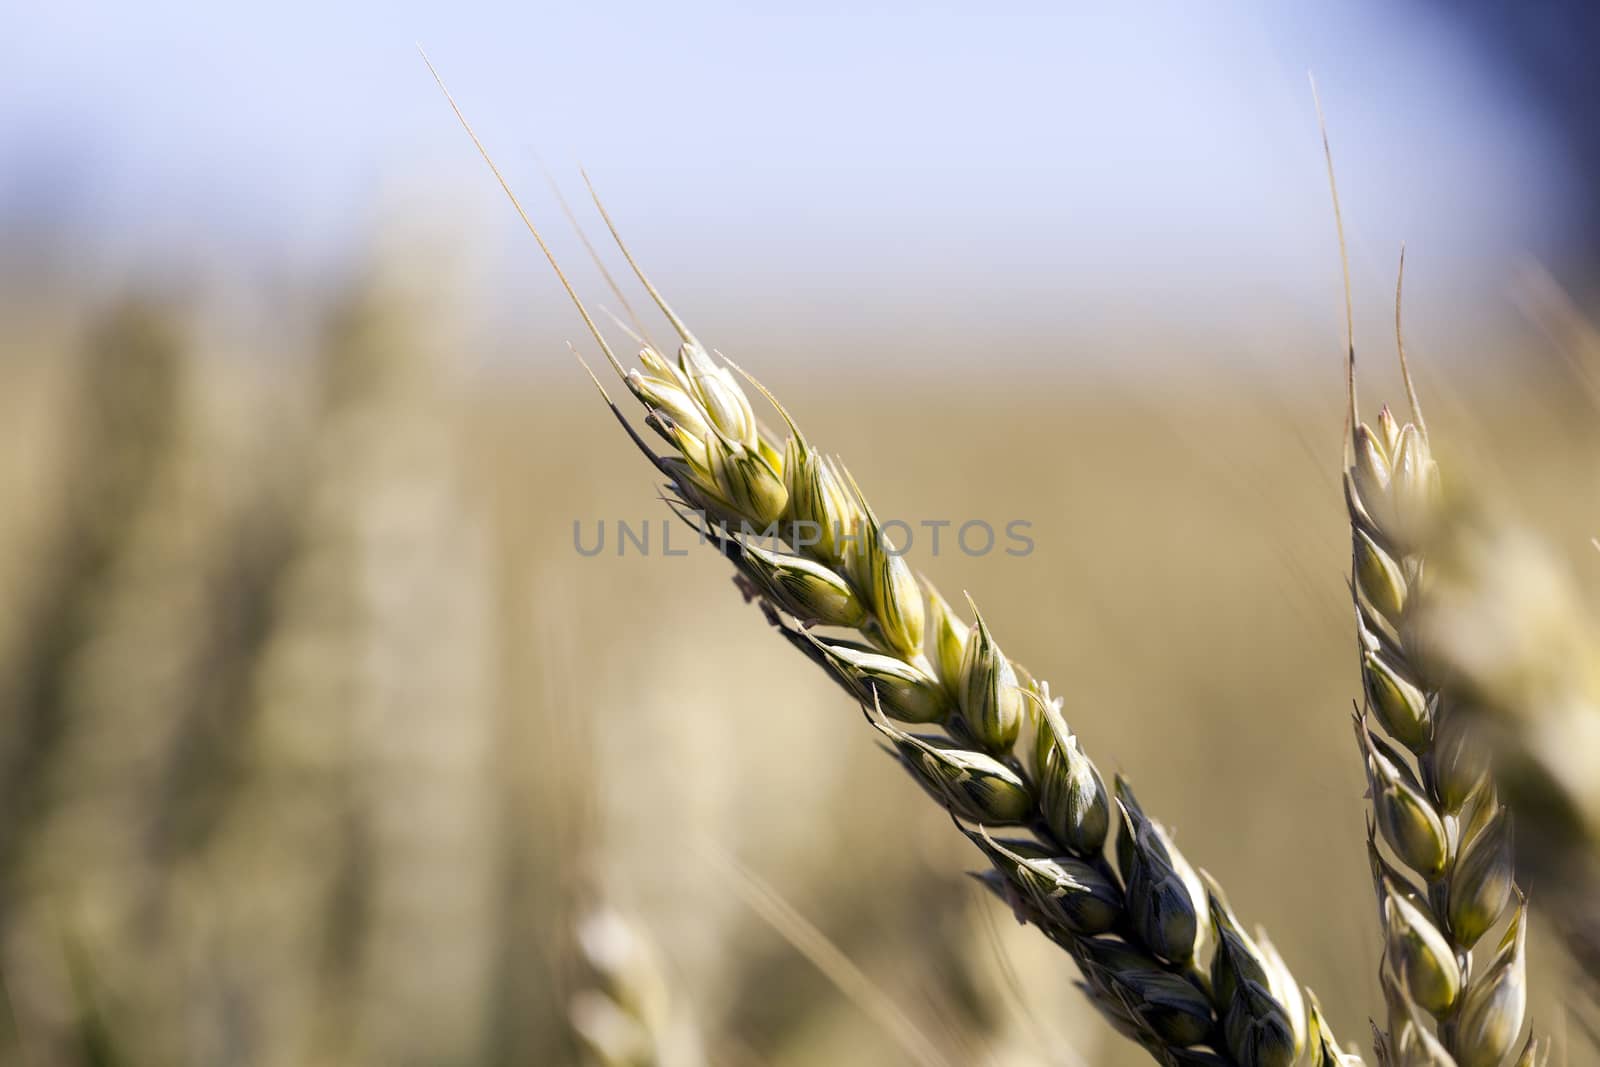  photographed closeup immature green wheat ears growing on agricultural field